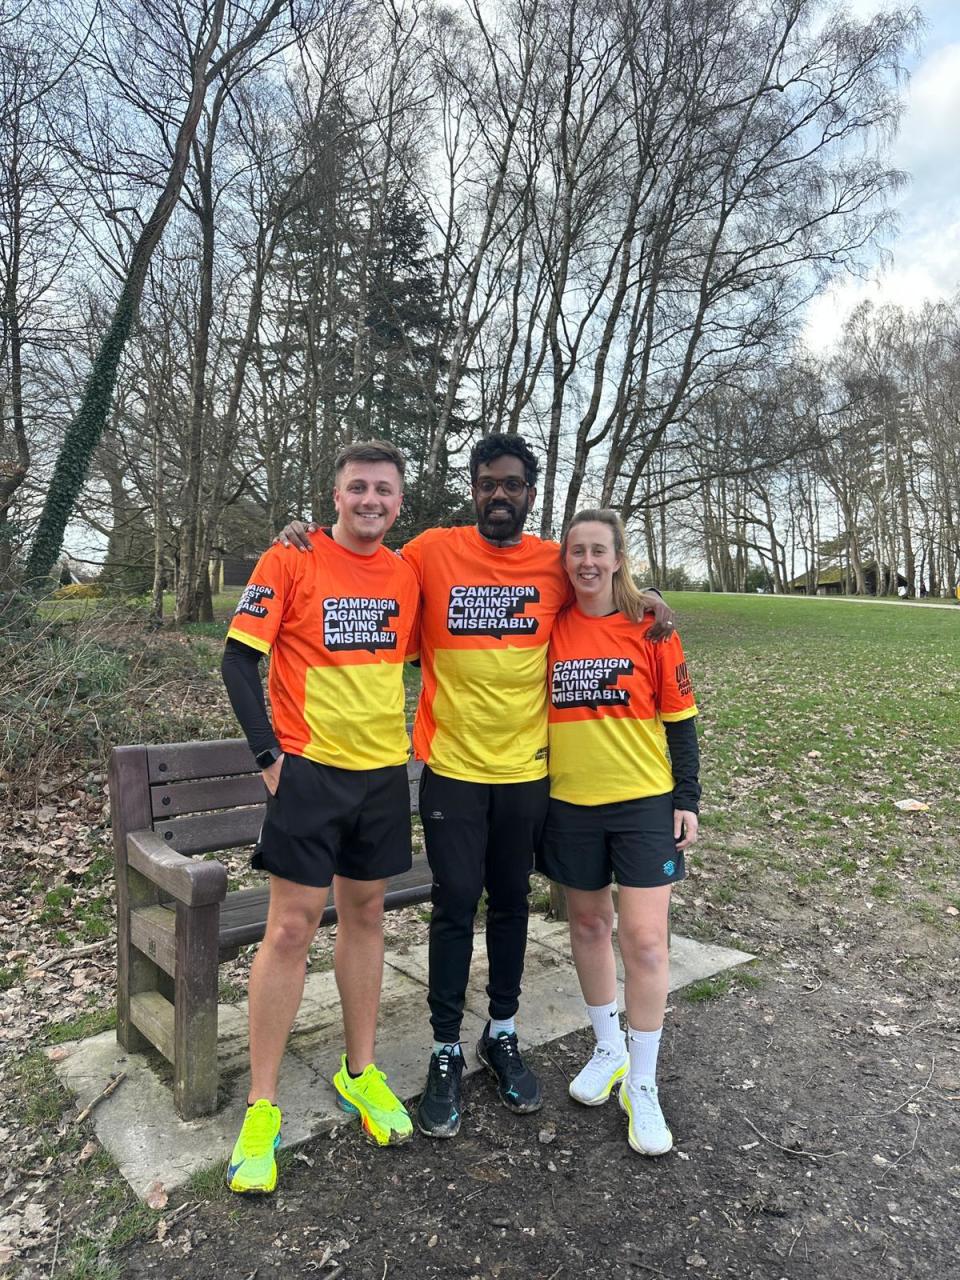 Luke Remfry, Romesh Ranganathan and Natalie Clements meet up during their training for the TCS London Marathon (Calm/PA)